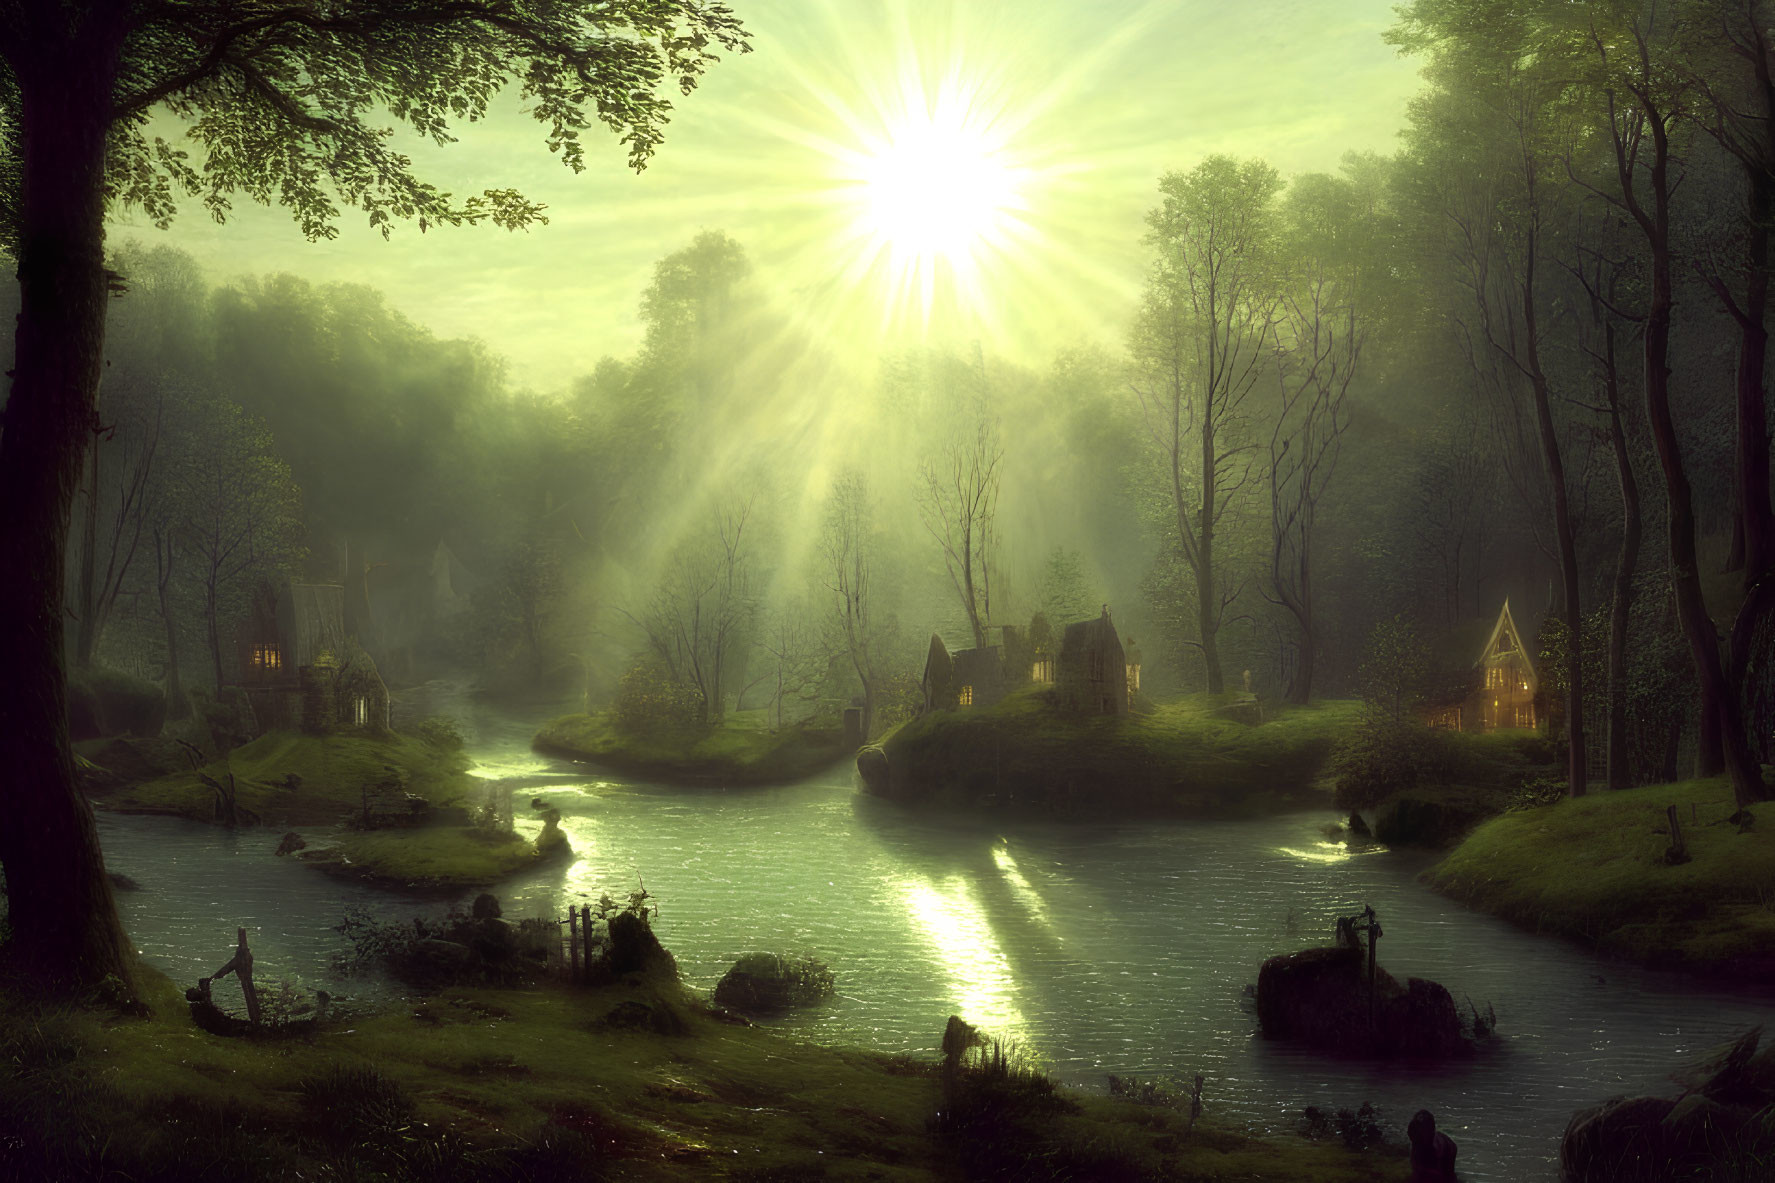 Serene forest village at sunrise with cottages, misty trees, and river reflections